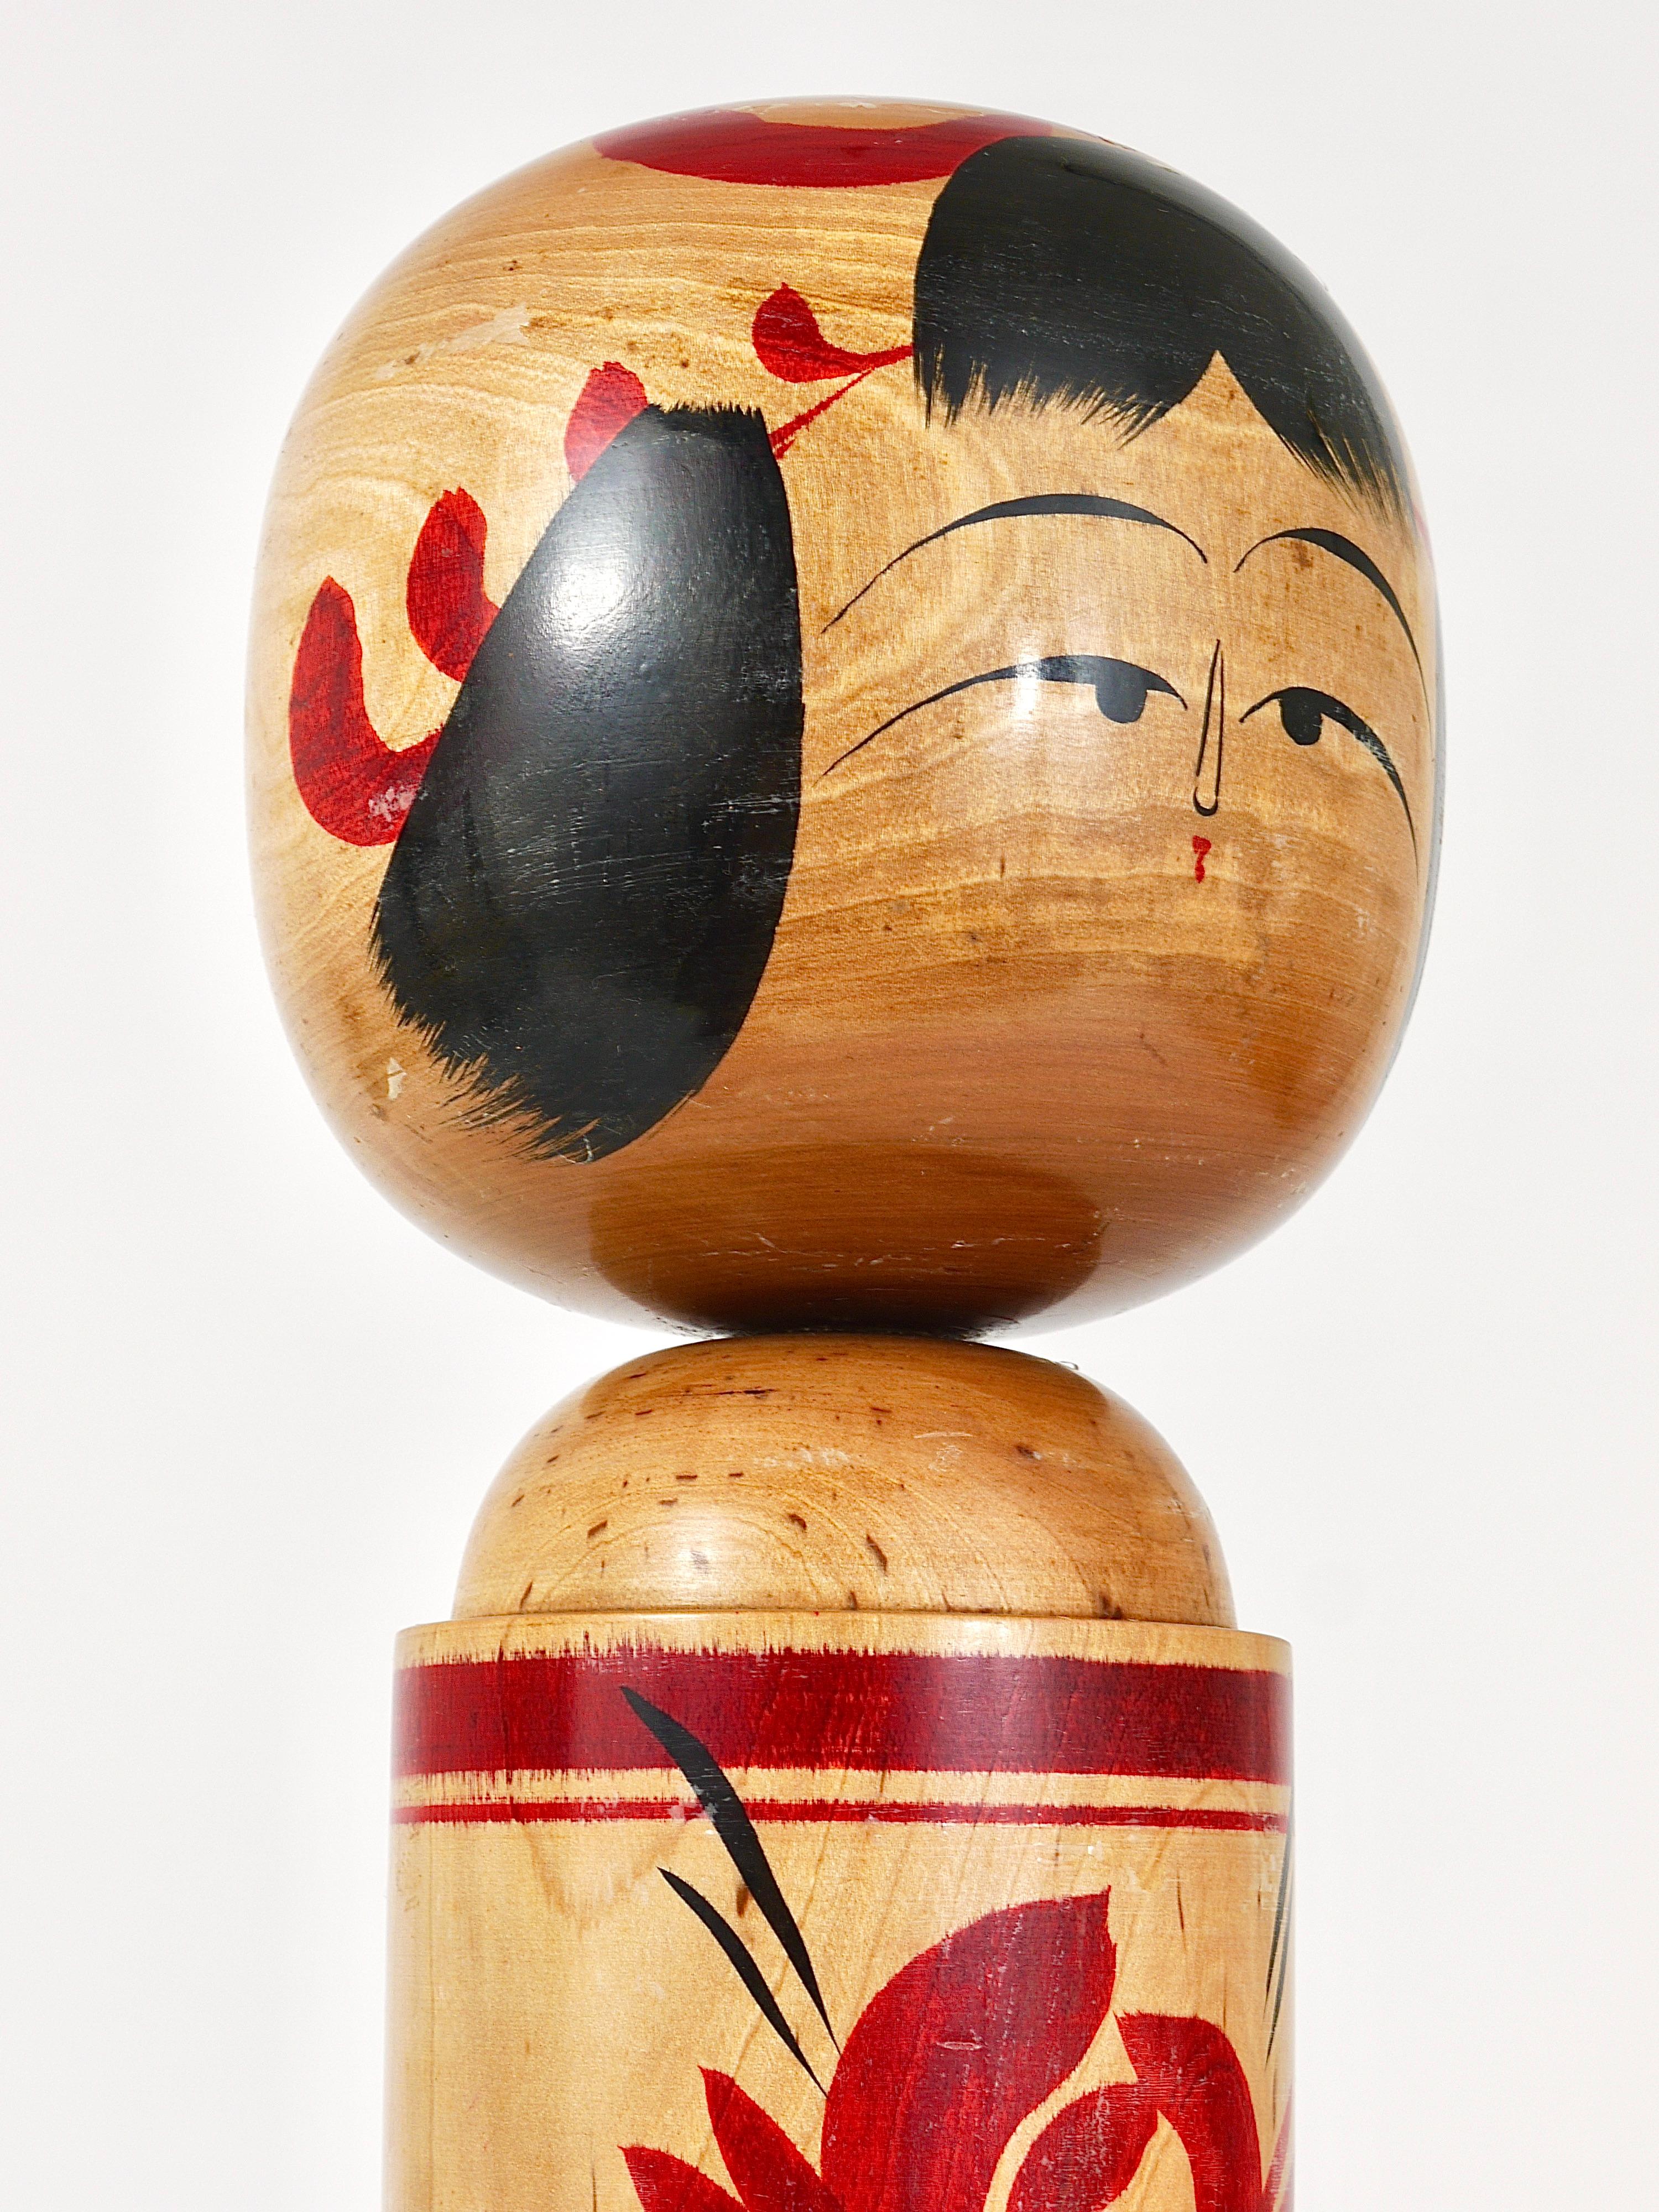 20th Century Decorative Kokeshi Doll Sculpture from Northern Japan, Hand-Painted, Signed